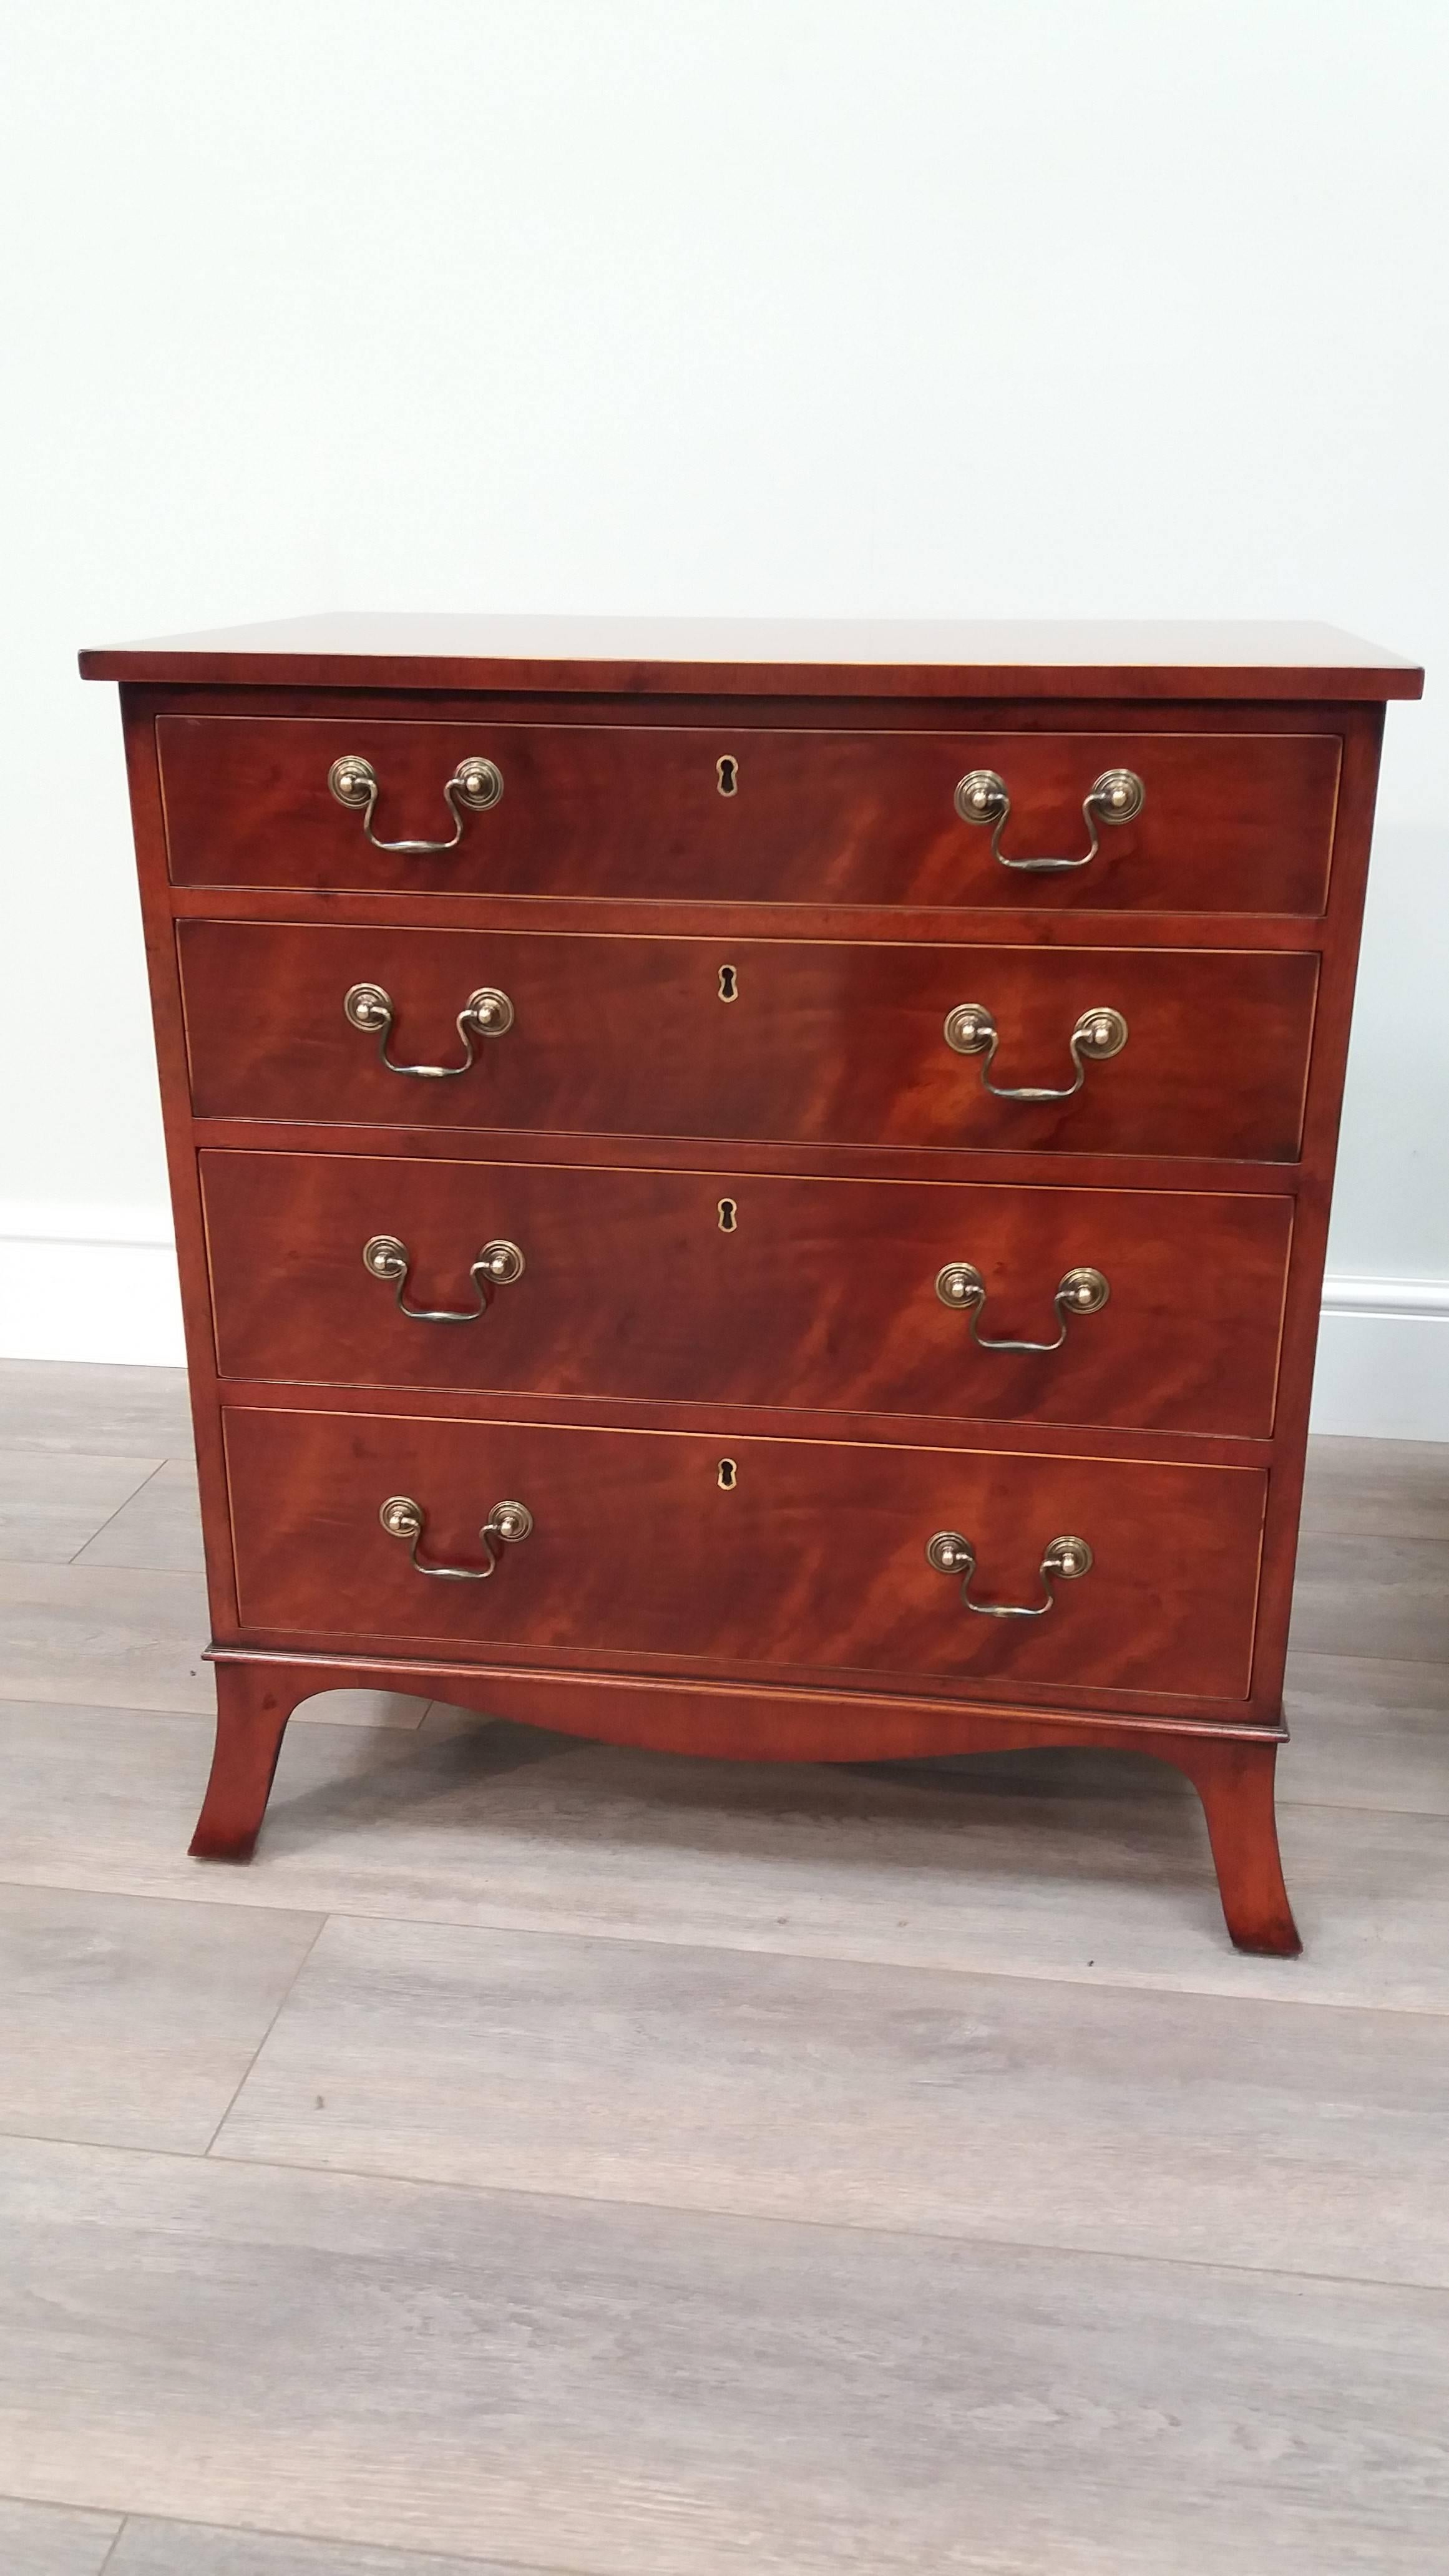 A similar pair of well figured mahogany Sheraton-style chest of drawers.  Featuring white boxwood inlays on the top and around the four graduated drawers. At 28" high and only 25.5" wide these make practical and stylish bedsides.
 

Arthur